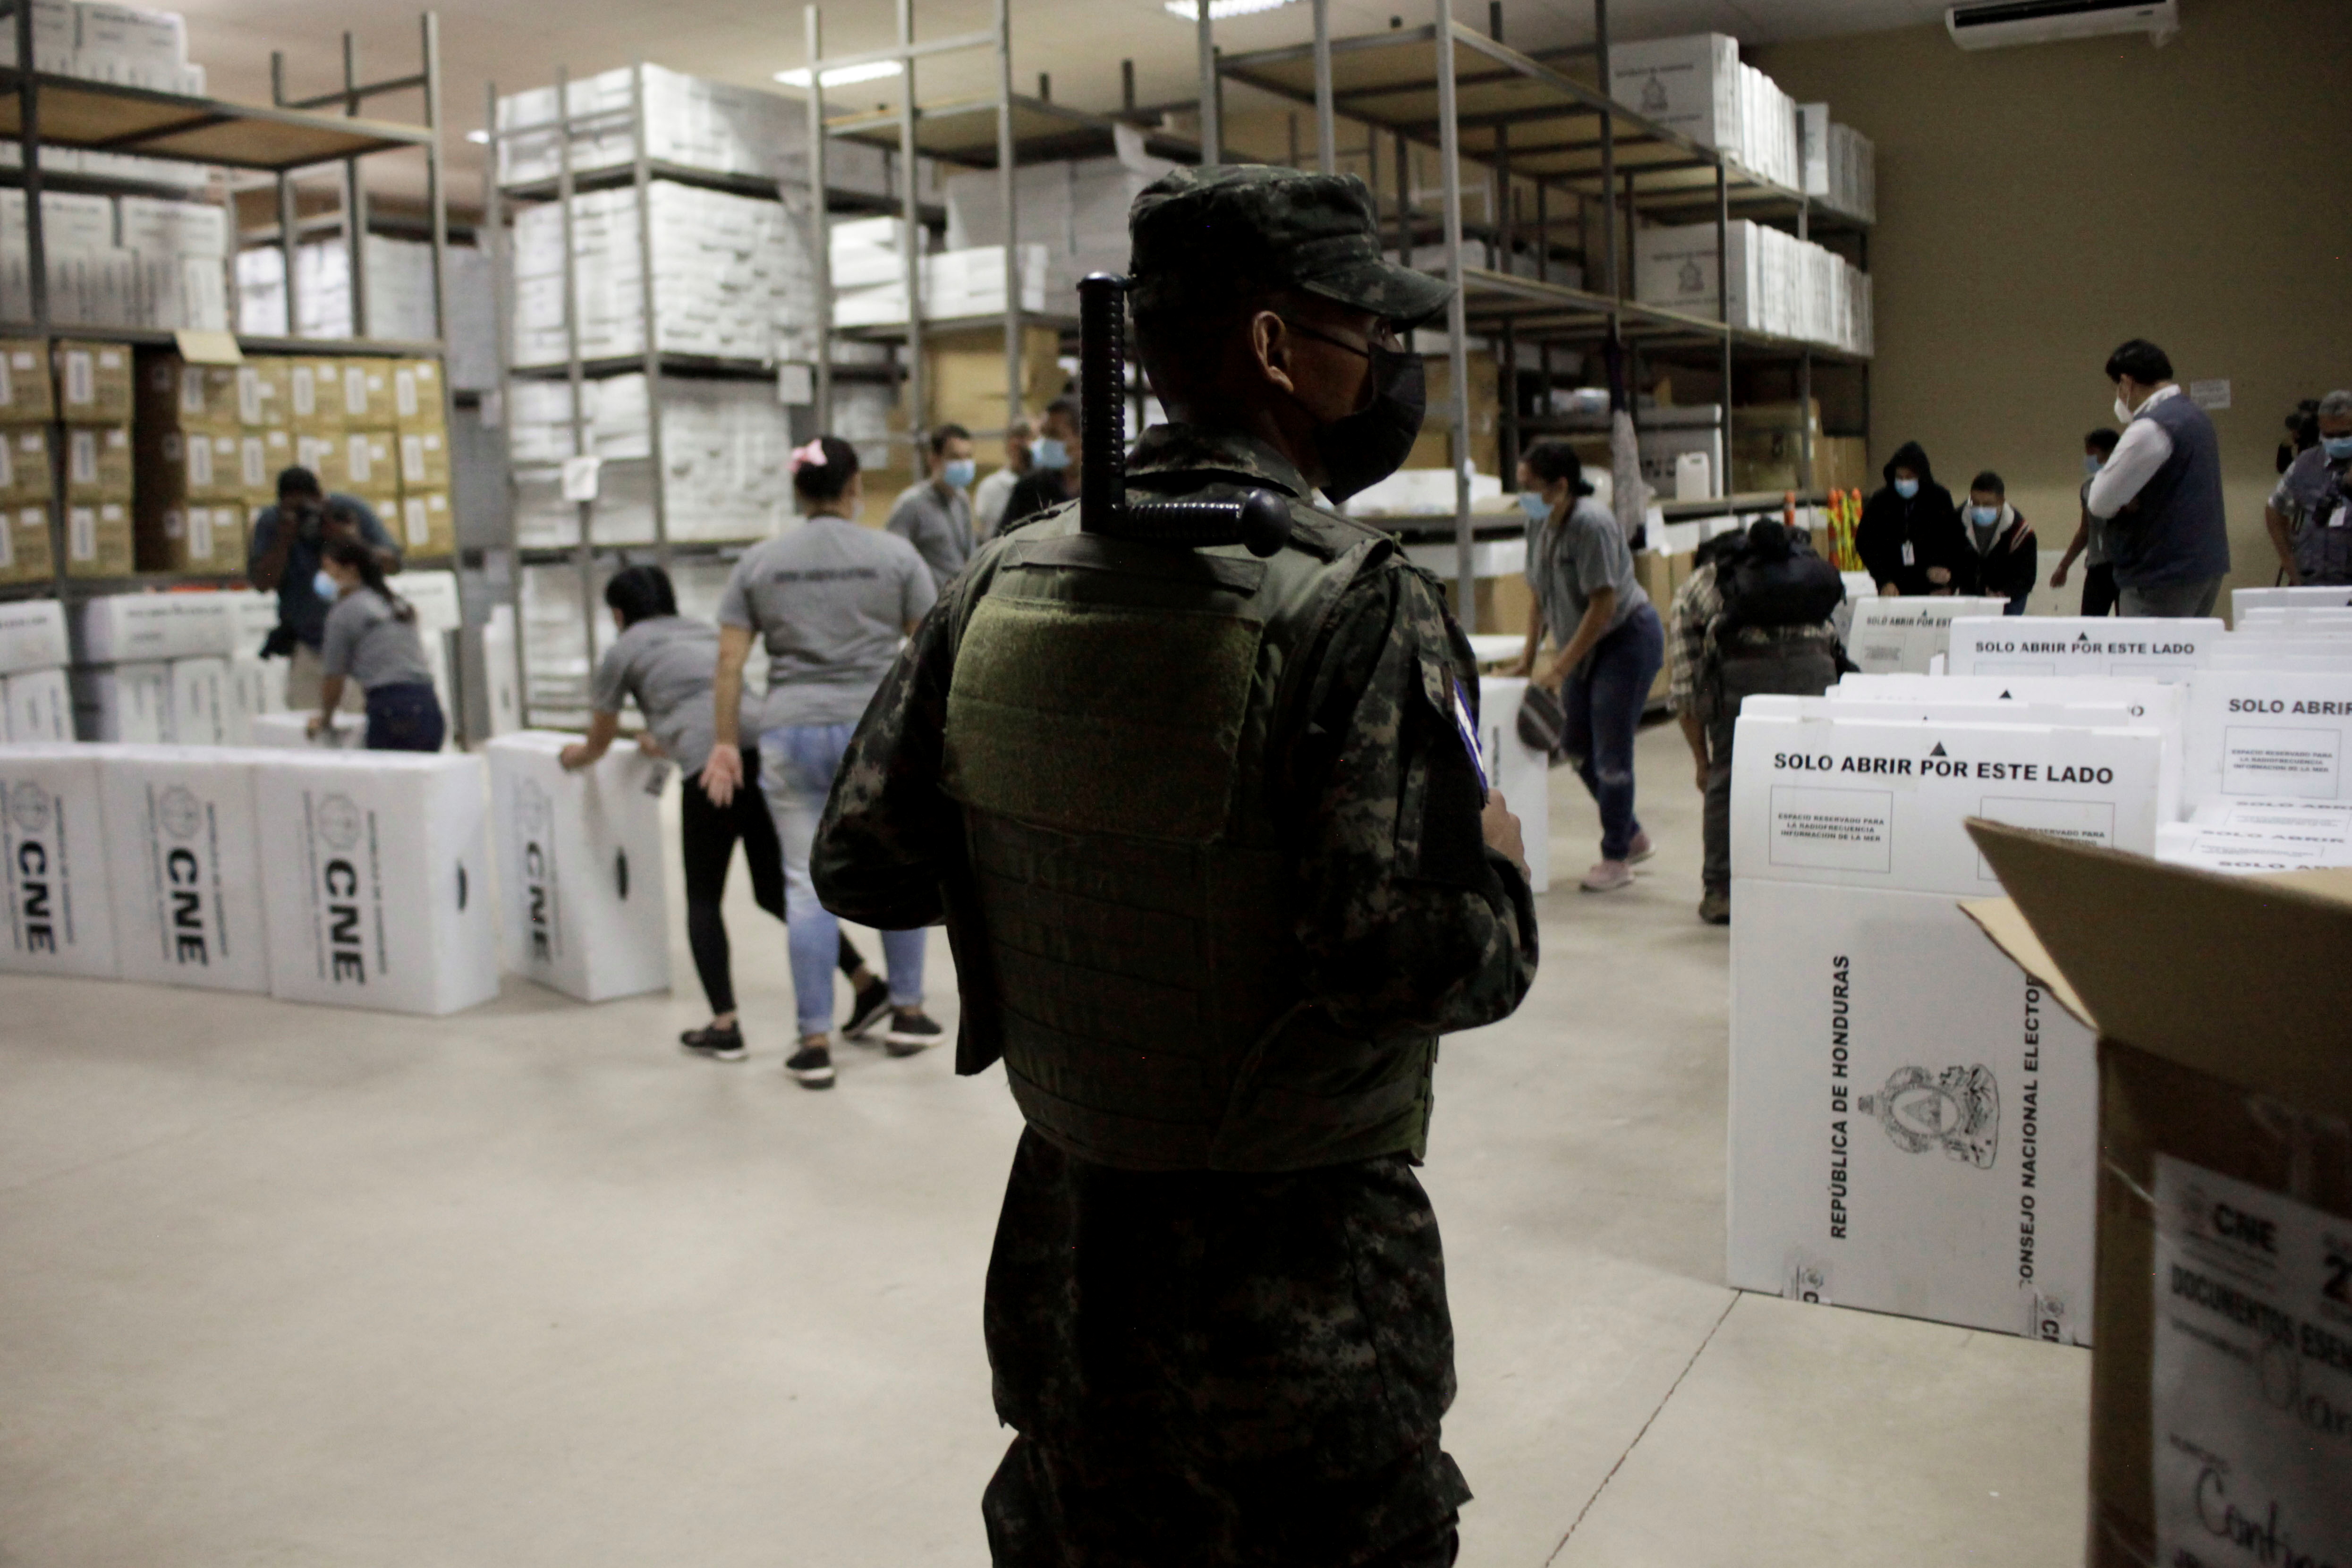 A soldier keeps watch as workers prepare boxes with voting materials for distribution throughout the country ahead of the November 28 general election, in Tegucigalpa, Honduras November 23, 2021. REUTERS/Fredy Rodriguez